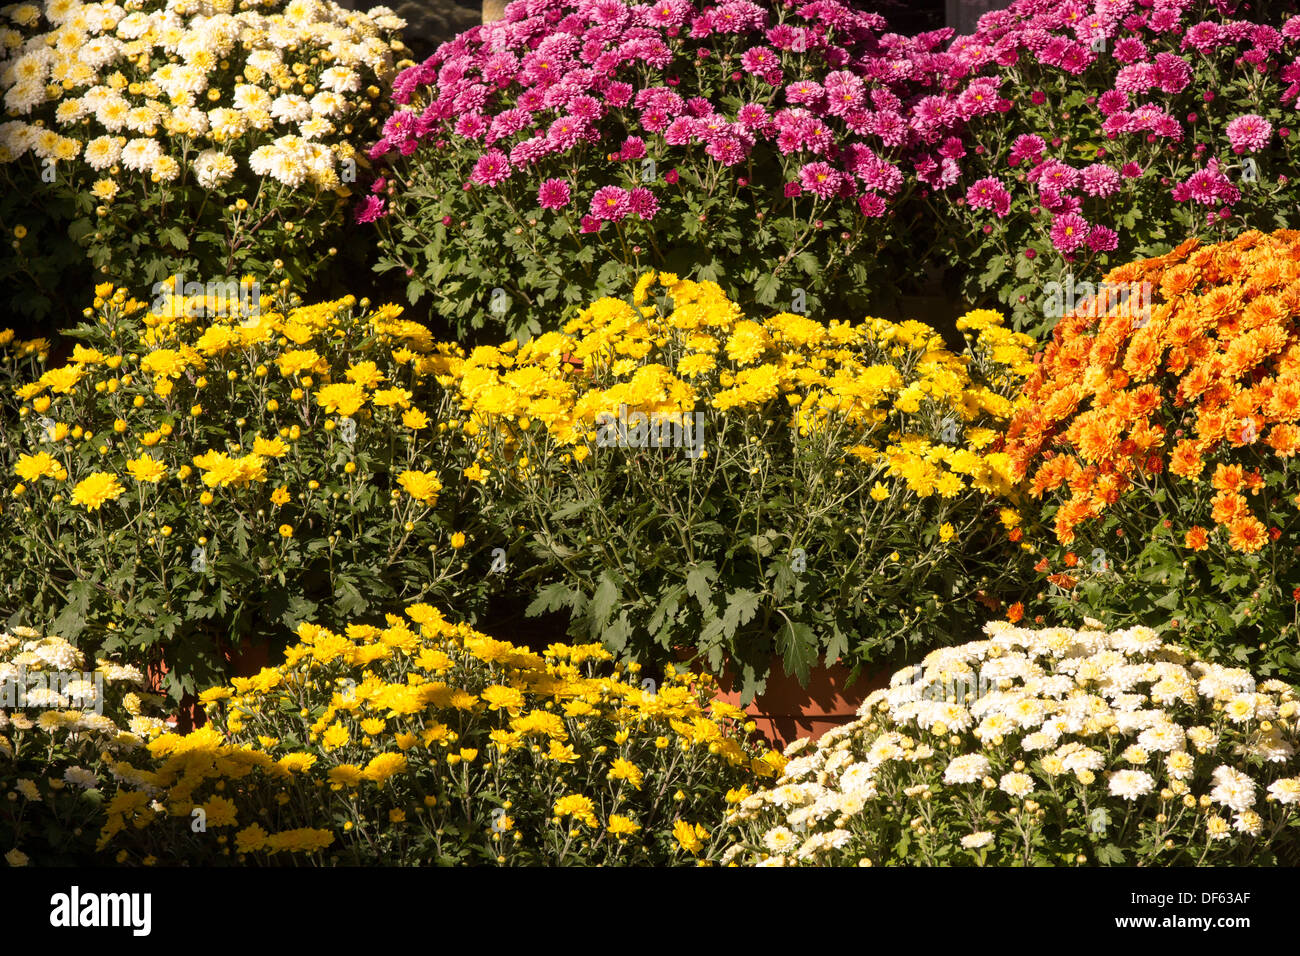 Potted Chrysanthemums on shelves Stock Photo